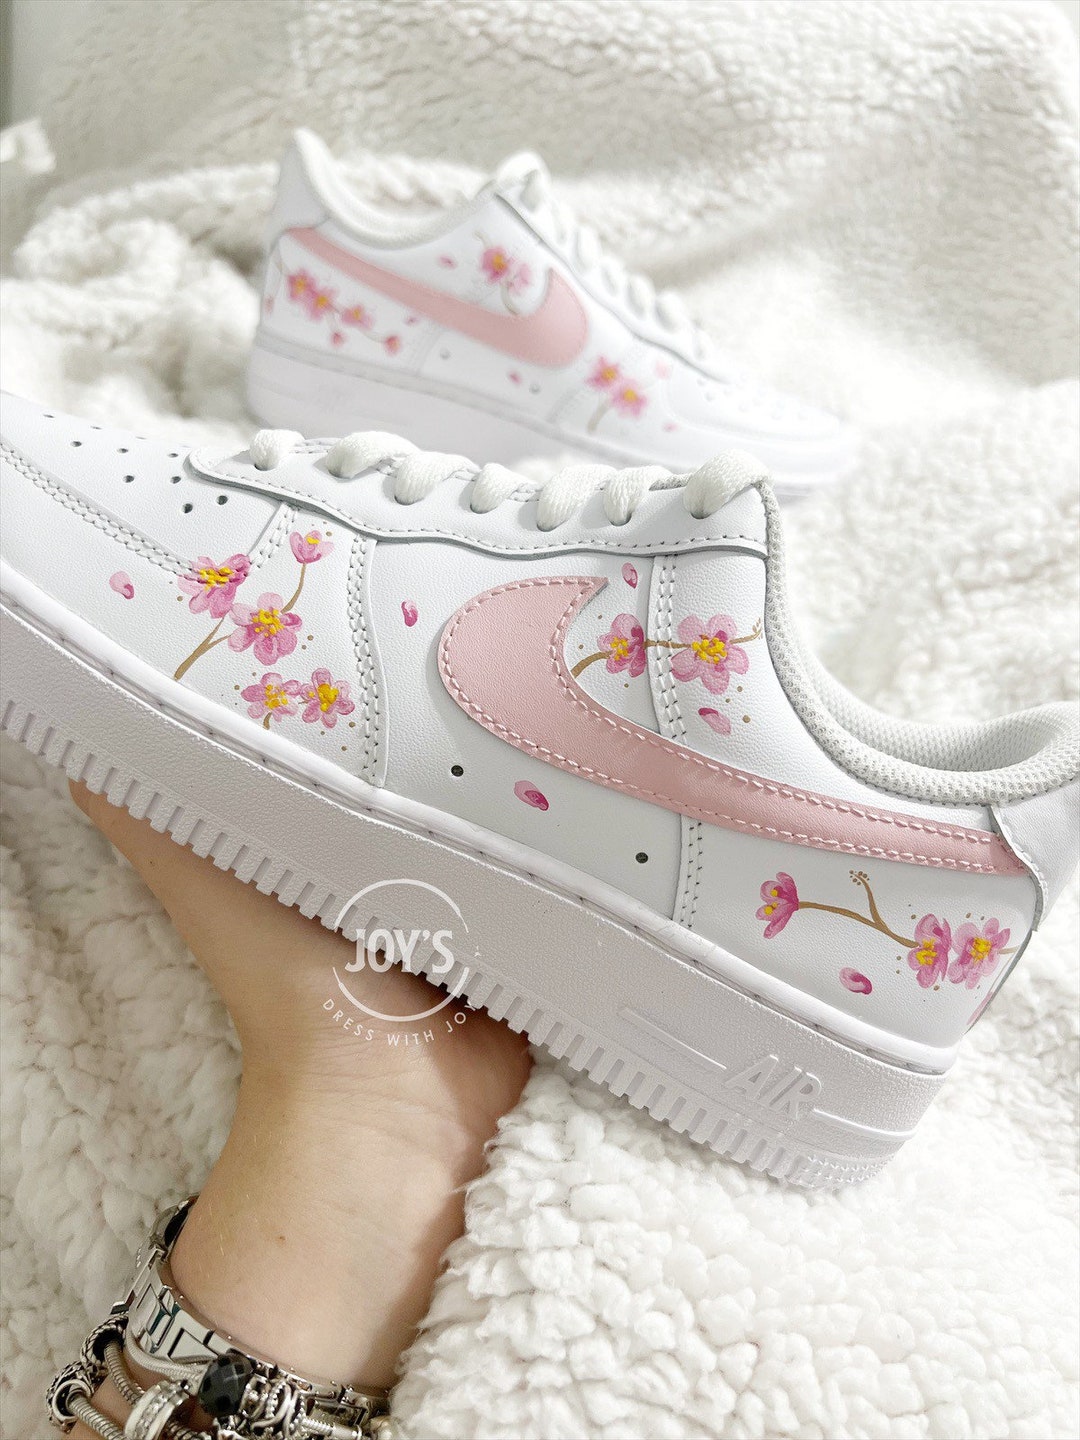 Buy Pink Air Force 1 Air Force 1s Custom Pink Air Forces Custom Online in  India 